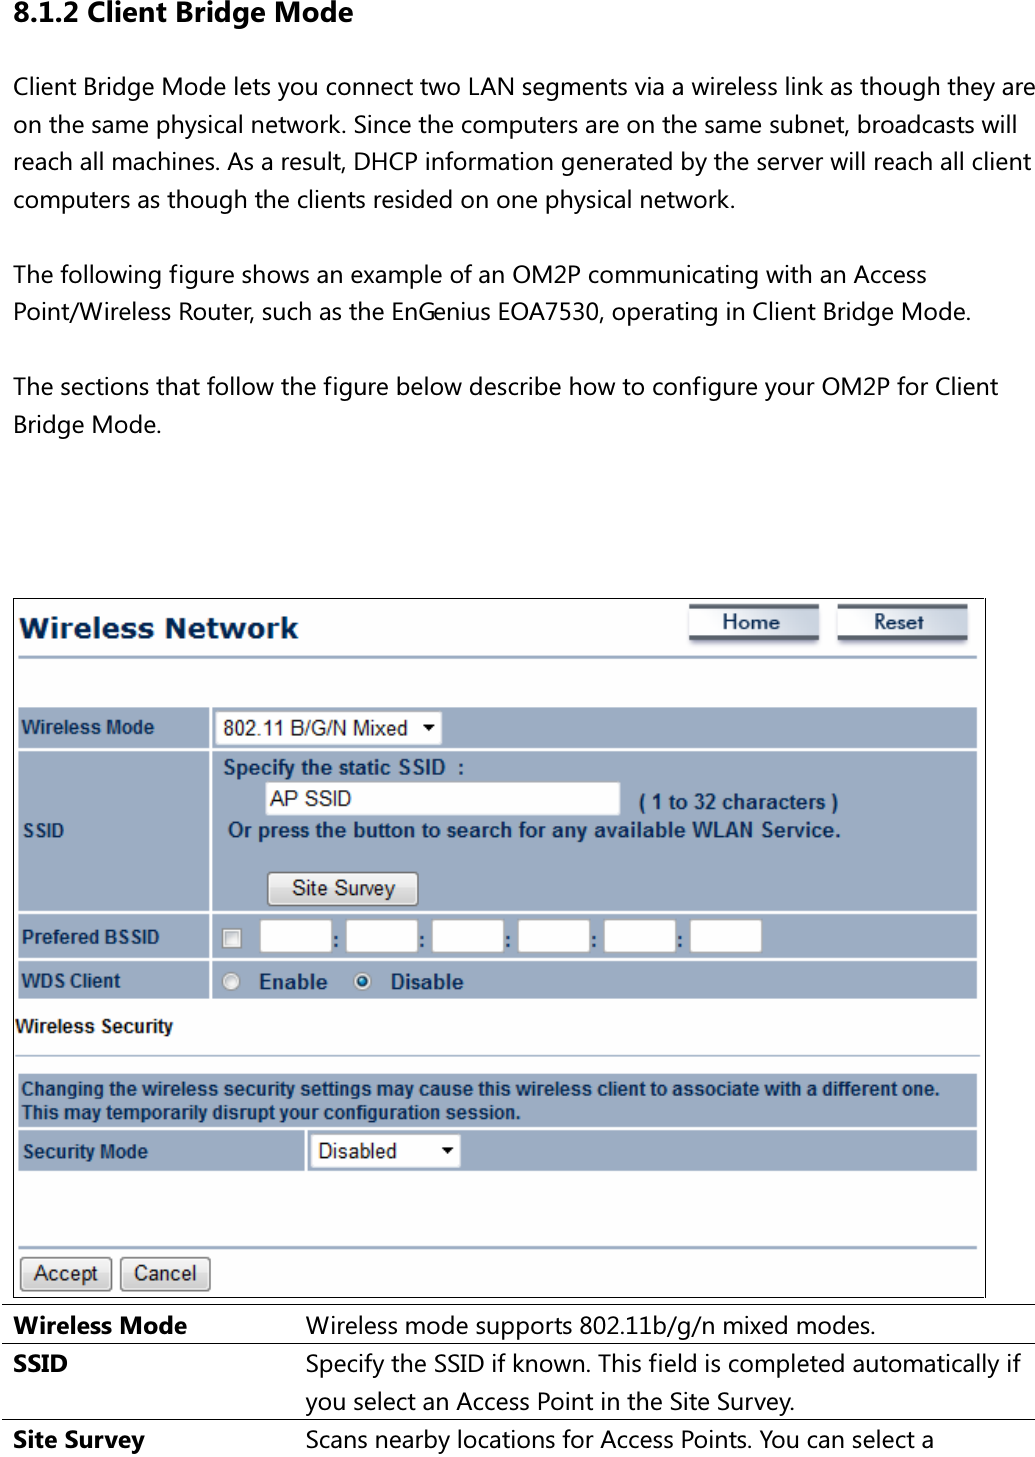 8.1.2 Client Bridge Mode Client Bridge Mode lets you connect two LAN segments via a wireless link as though they are on the same physical network. Since the computers are on the same subnet, broadcasts will reach all machines. As a result, DHCP information generated by the server will reach all client computers as though the clients resided on one physical network.  The following figure shows an example of an OM2P communicating with an Access Point/Wireless Router, such as the EnGenius EOA7530, operating in Client Bridge Mode.    The sections that follow the figure below describe how to configure your OM2P for Client Bridge Mode.      Wireless Mode  Wireless mode supports 802.11b/g/n mixed modes. SSID  Specify the SSID if known. This field is completed automatically if you select an Access Point in the Site Survey. Site Survey  Scans nearby locations for Access Points. You can select a 